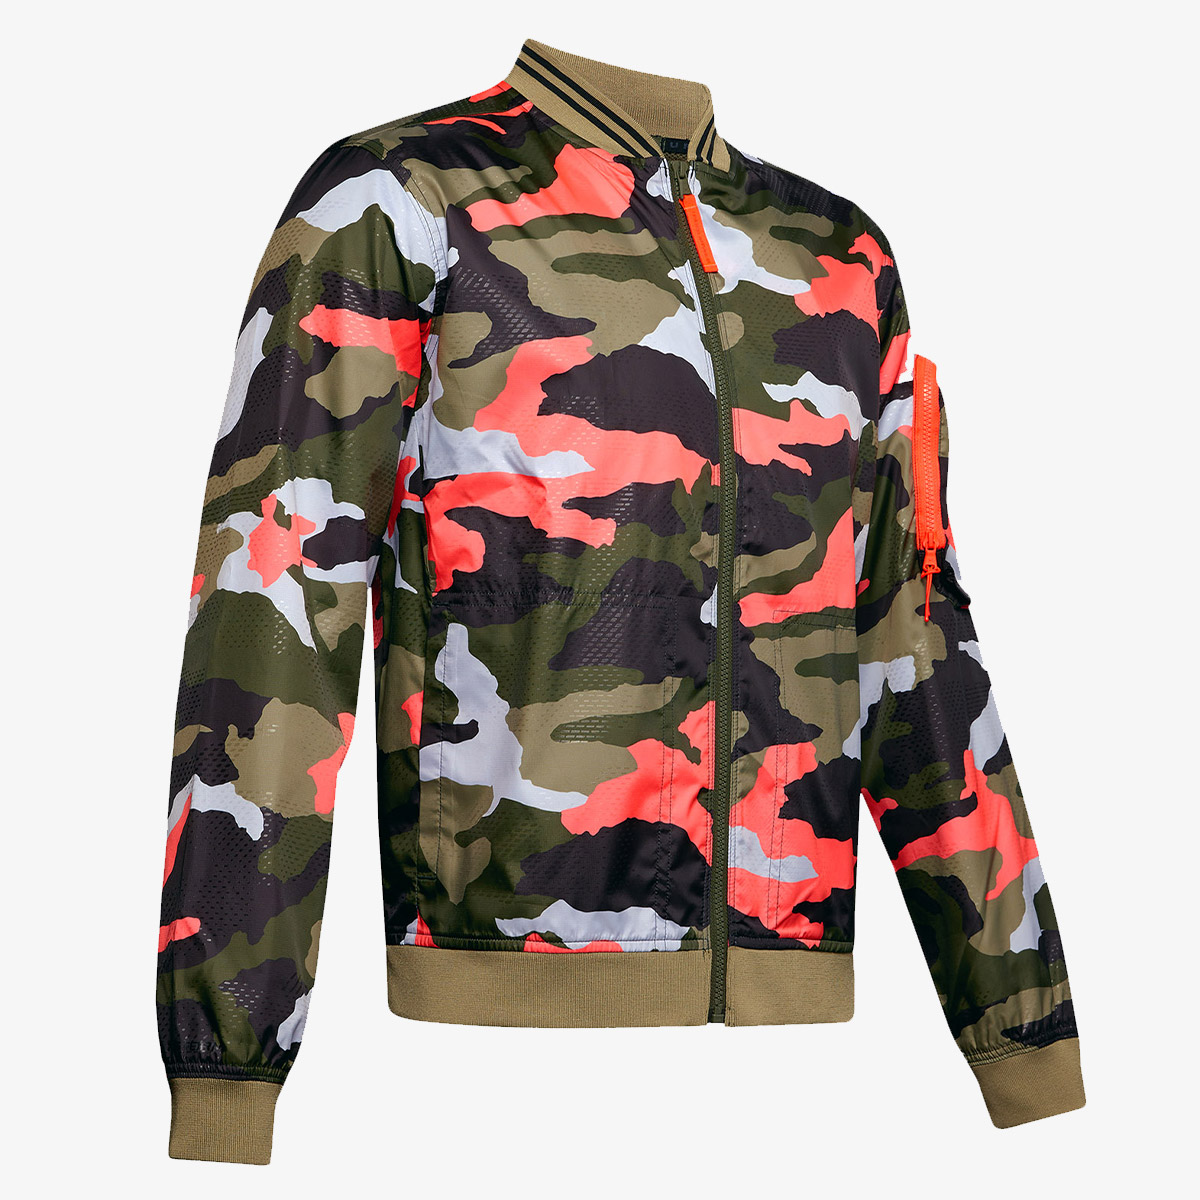 Under Armour UA Unstoppable Camo Bomber Jacket 